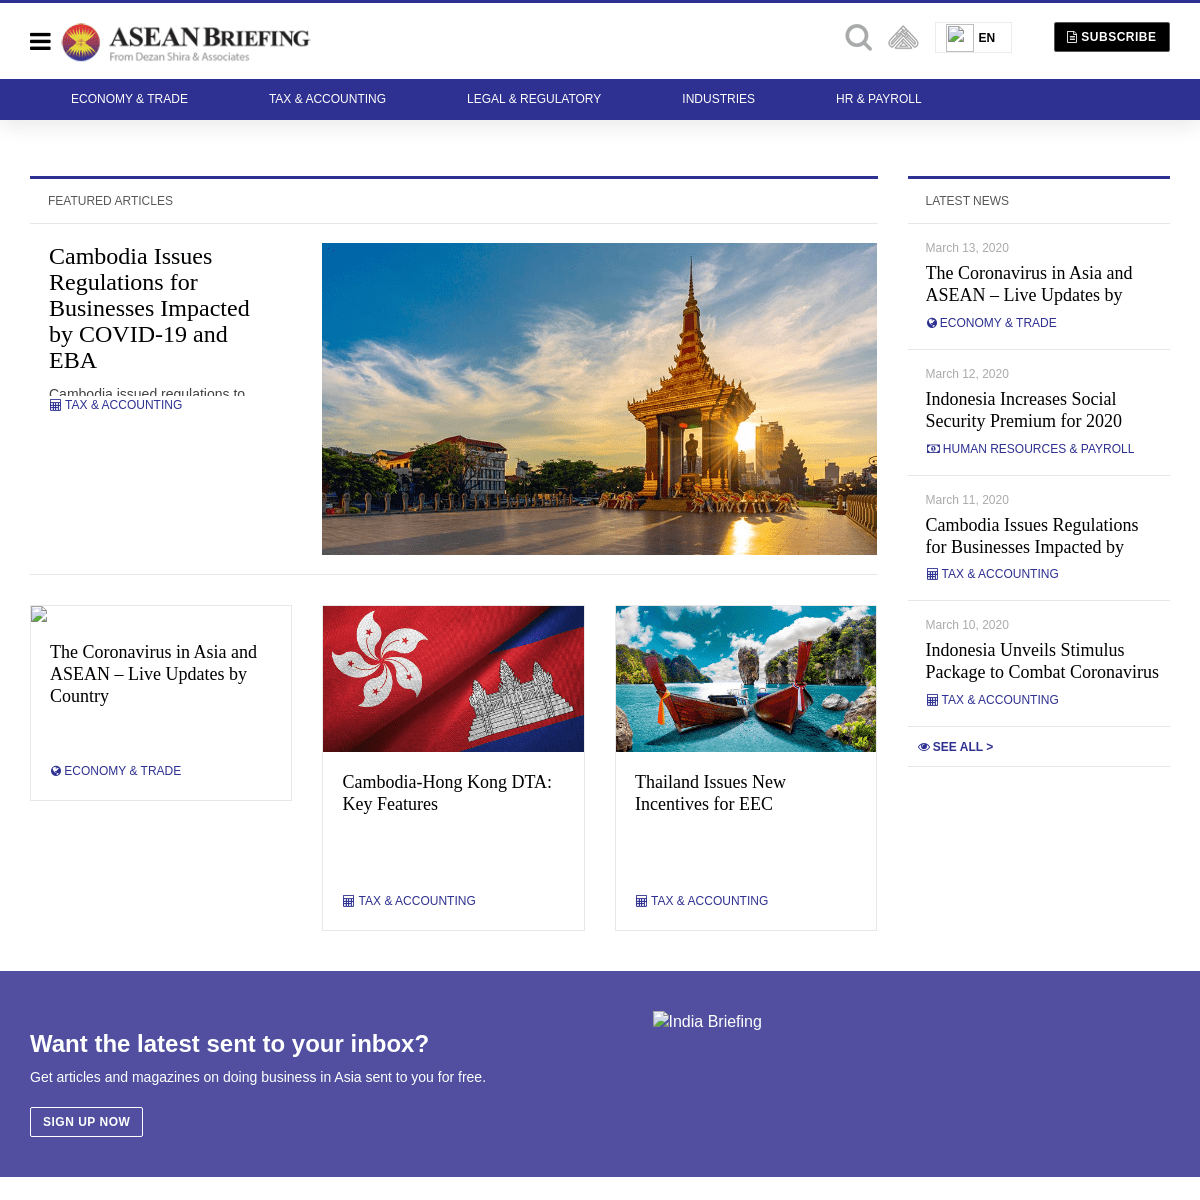 A complete backup of aseanbriefing.com